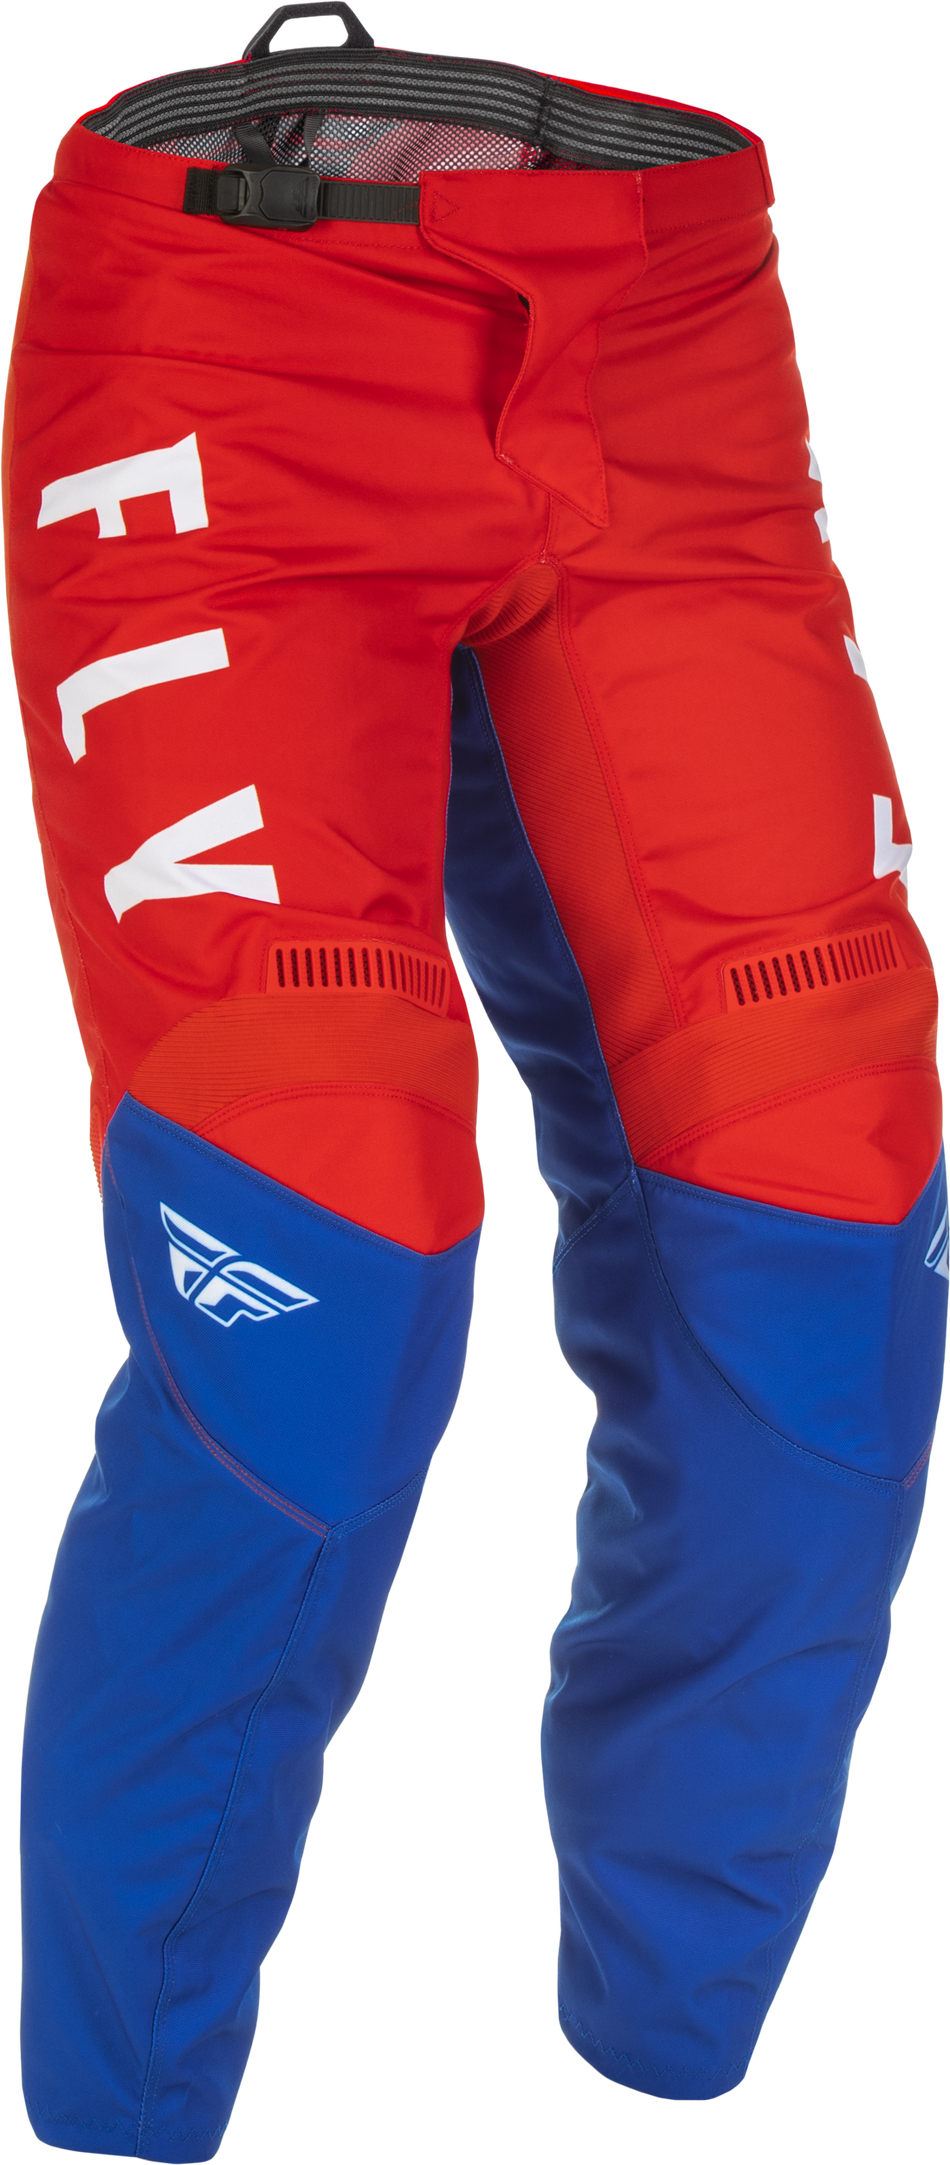 FLY RACING F-16 Pants Red/White/Blue Sz 38 375-93438